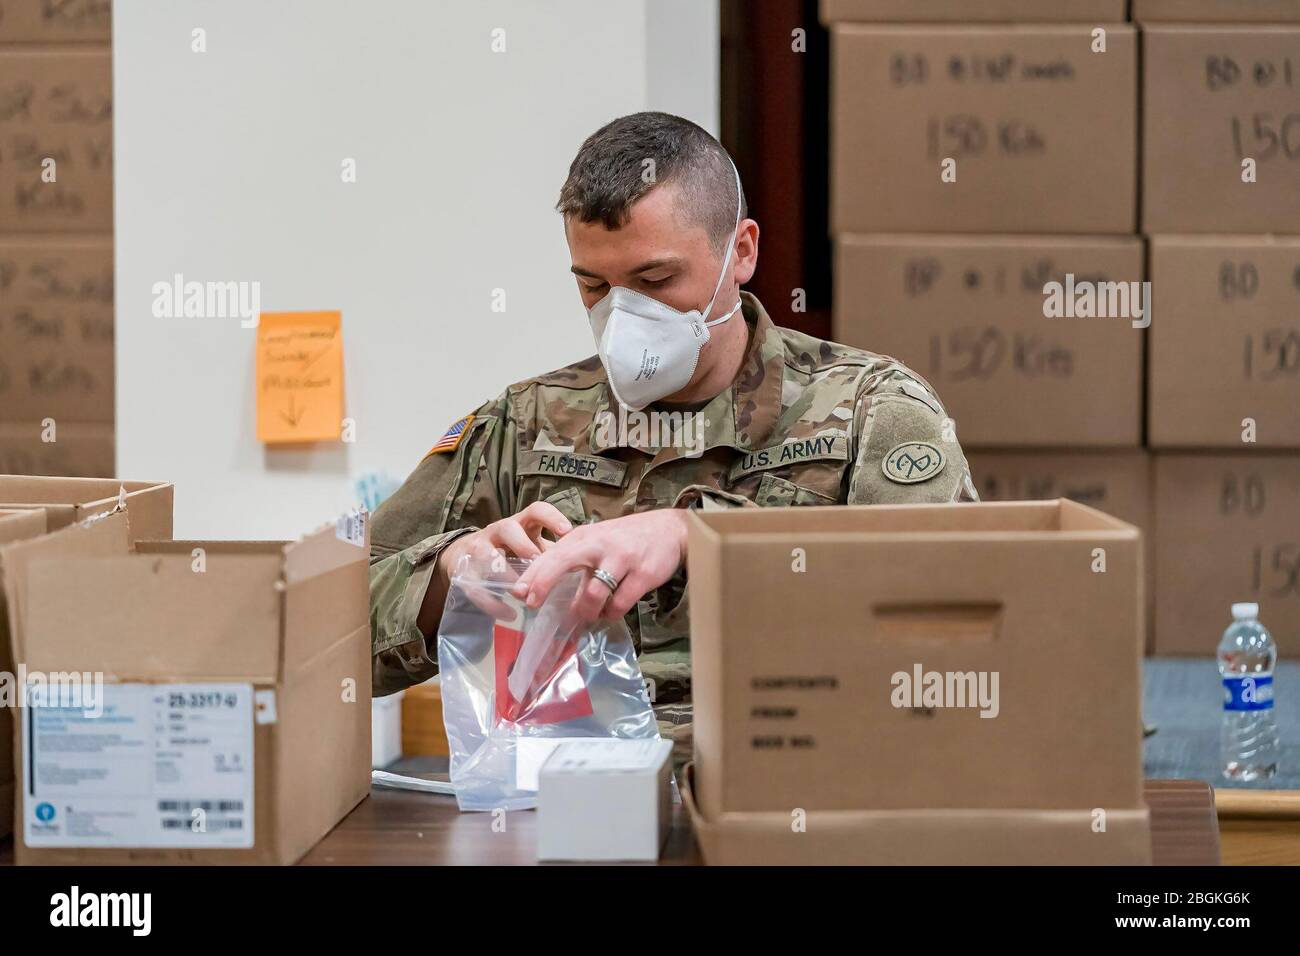 New York Army National Guard Spc. Justin Farber, assembles novel coronavirus (COVID-19) specimen collection test kits at the New York State Department of Health’s Wadsworth Center in Albany, N.Y., April 4, 2020. These test kits will be utilized at drive through sample sites across the state as part of the statewide effort of more than 2,700 members of the New York National Guard responding to community needs to mitigate the effects of the COVID 19 pandemic. N.Y. State Department of Health photo by Mike Wren. Stock Photo